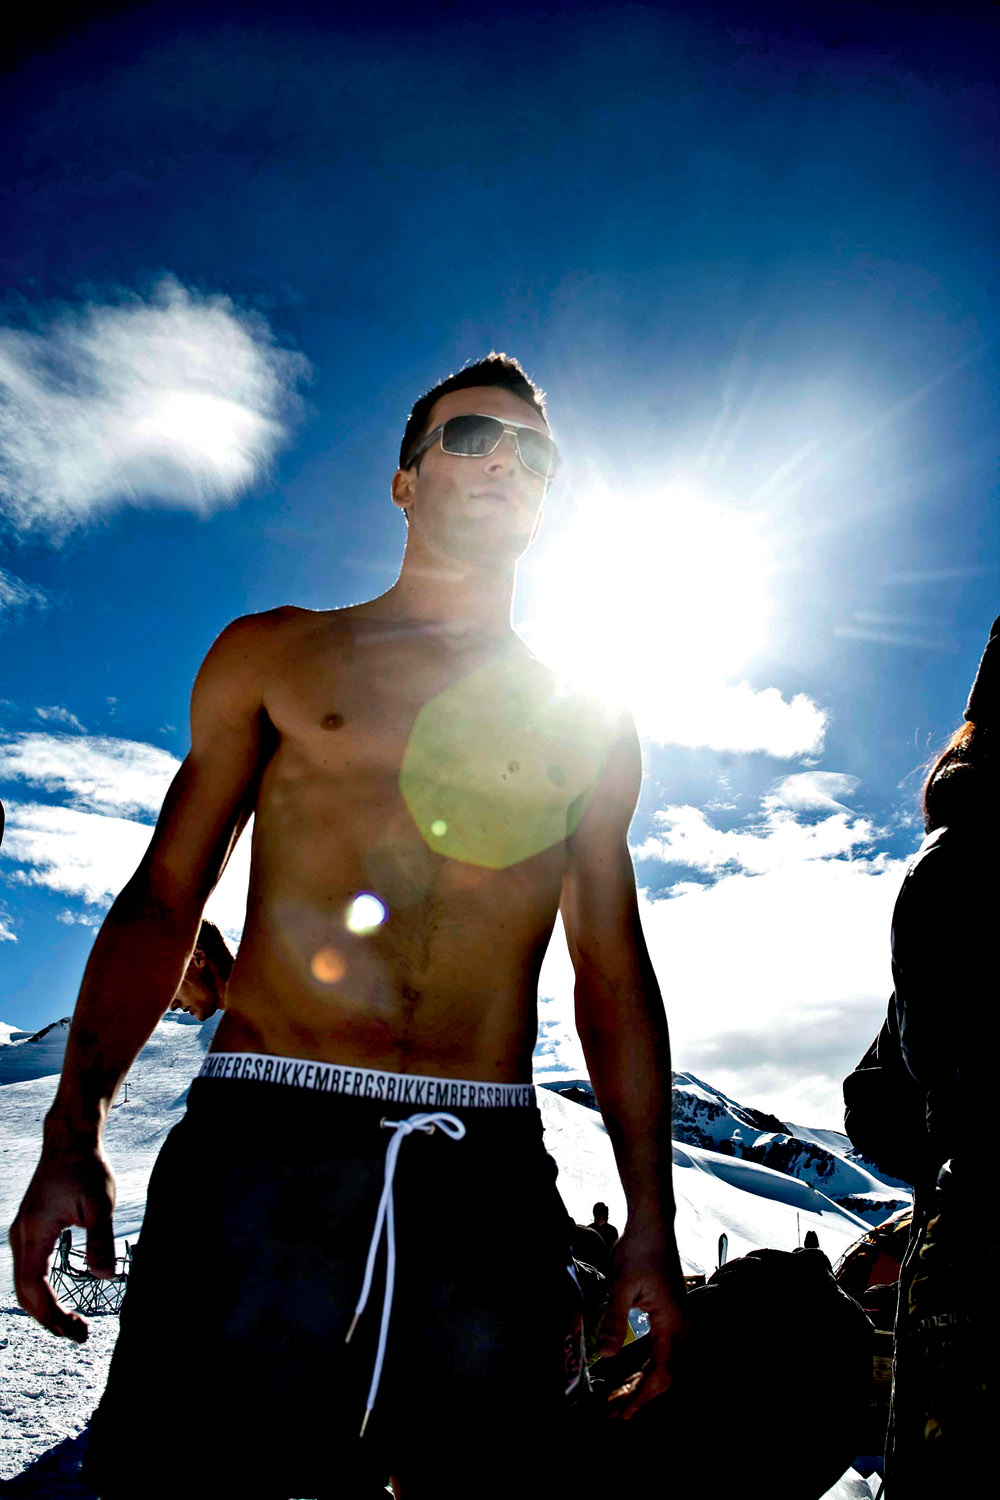 Behind the Scenes at Dirk Bikkembergs Spring 2010 Ad Campaign Shoot at the Andes